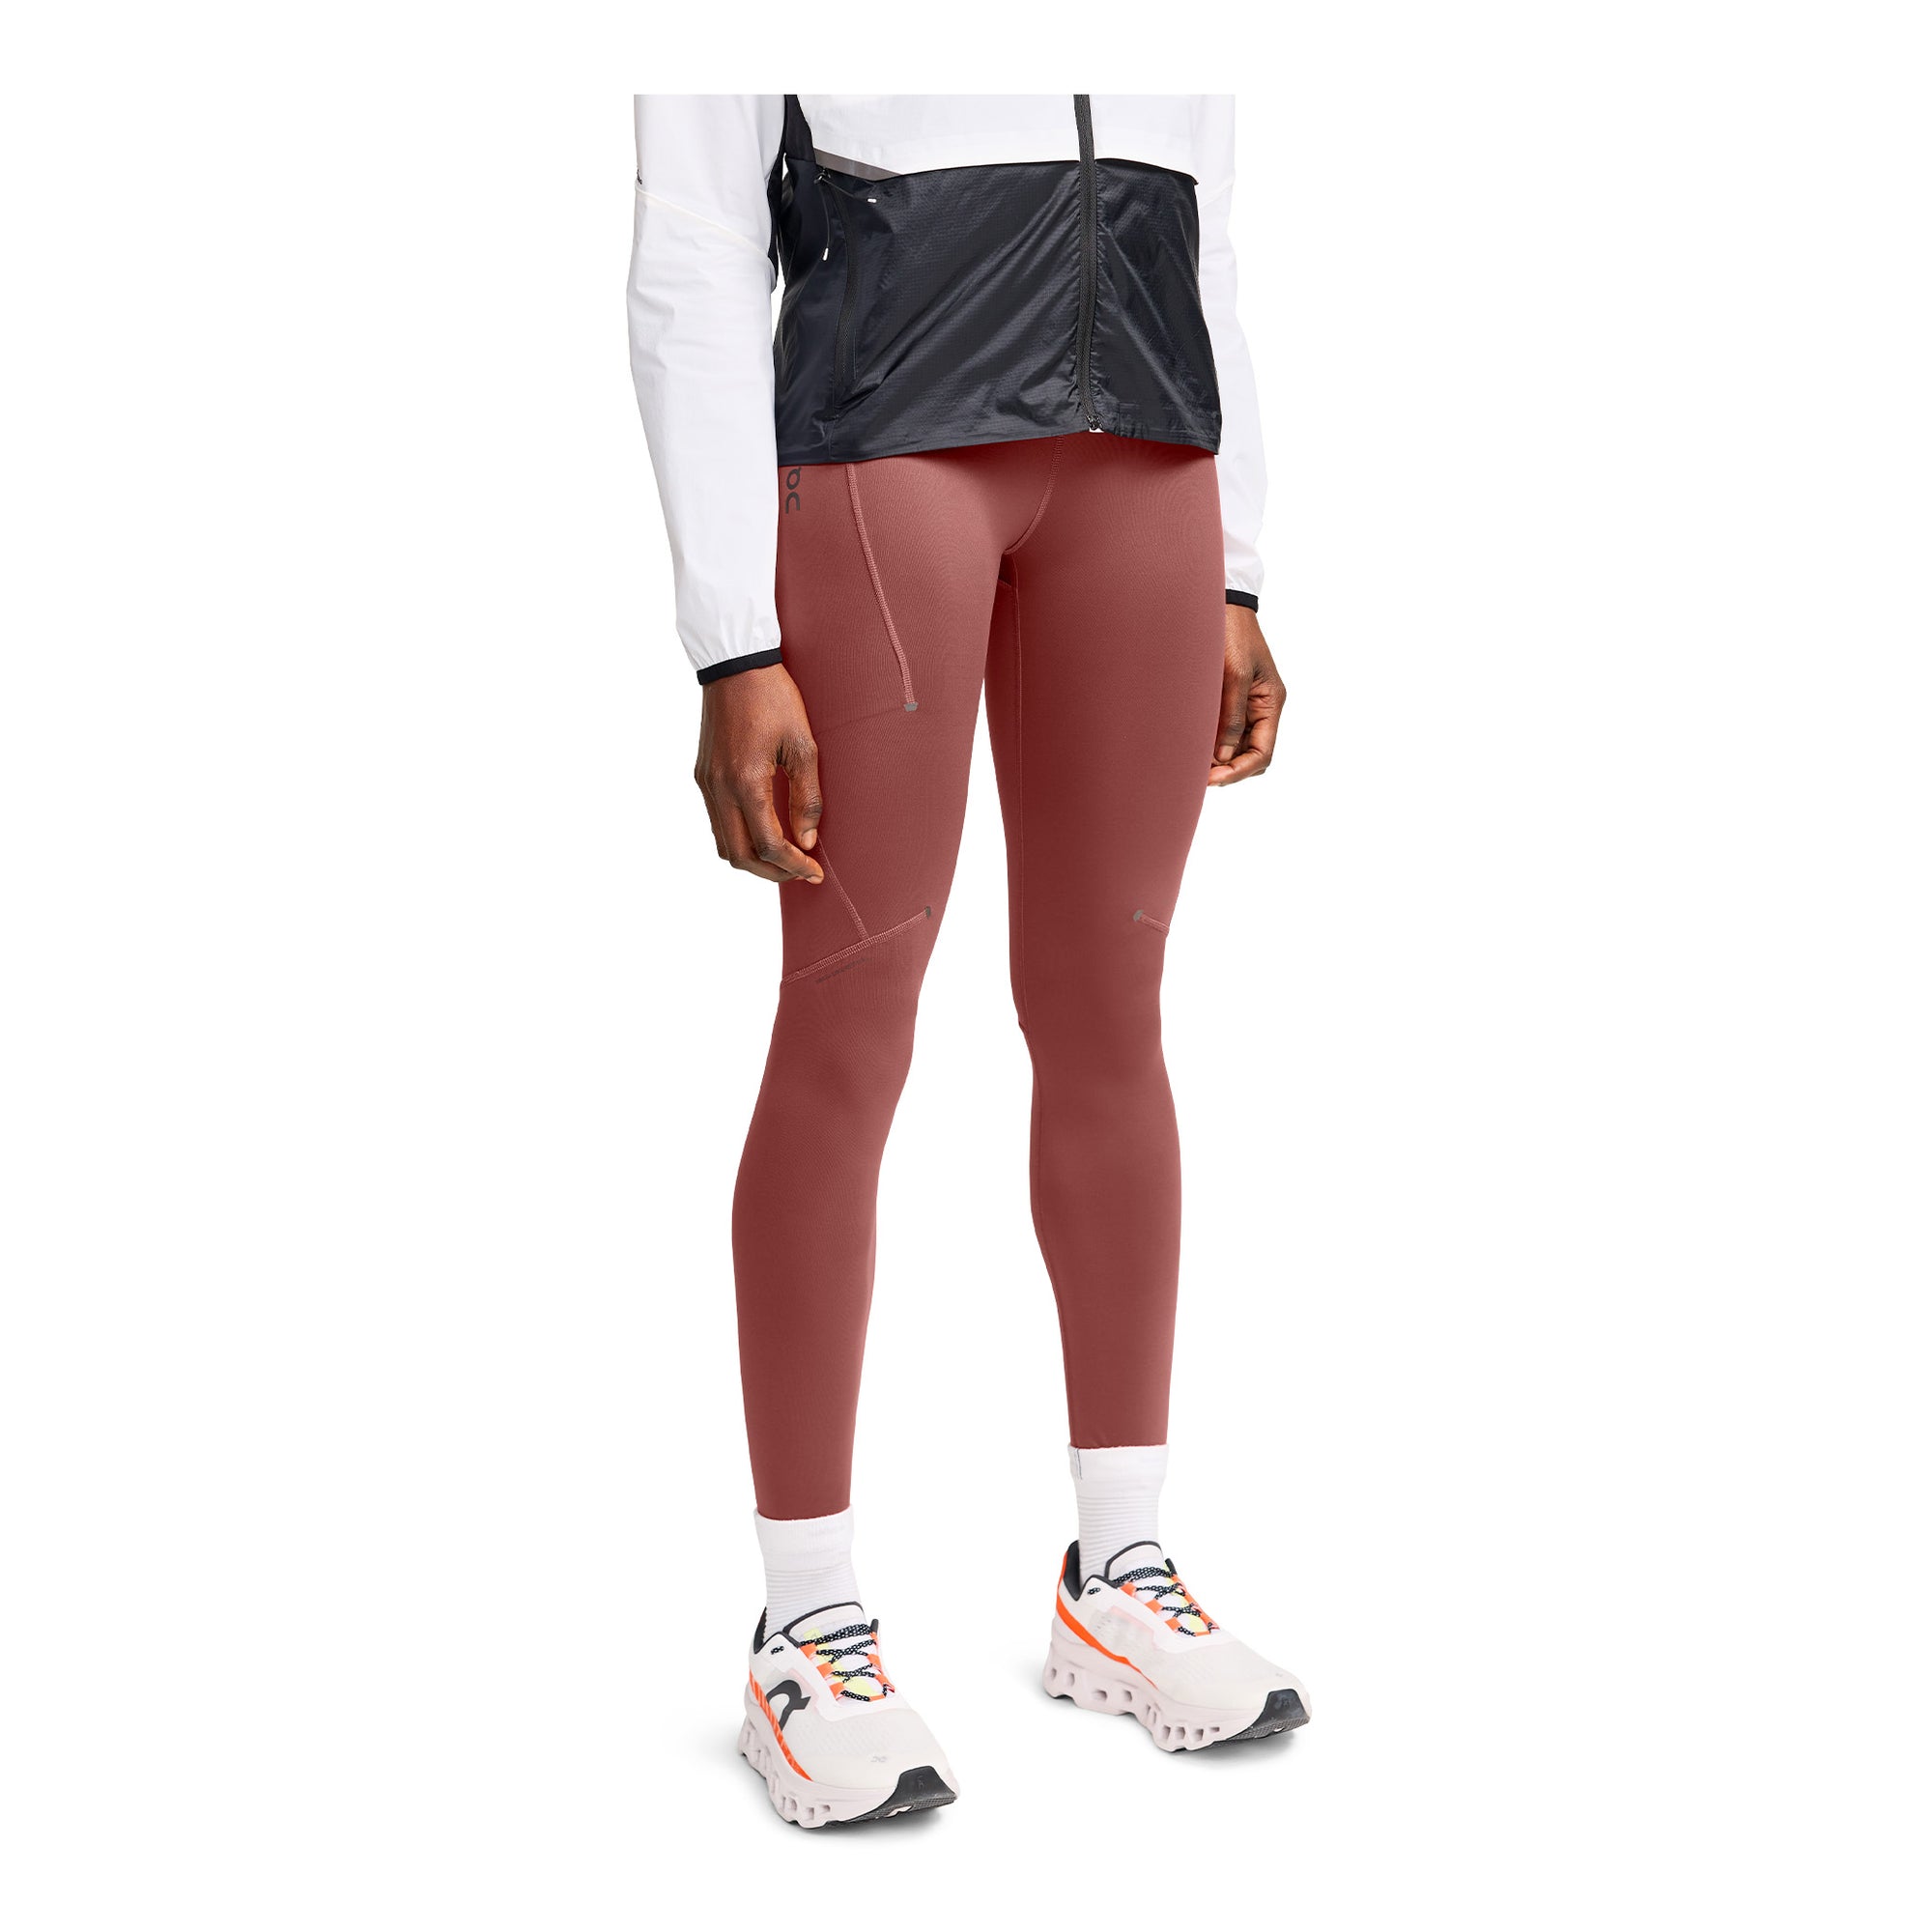 ON PERFORMANCE TIGHTS 7/8 - FEMME